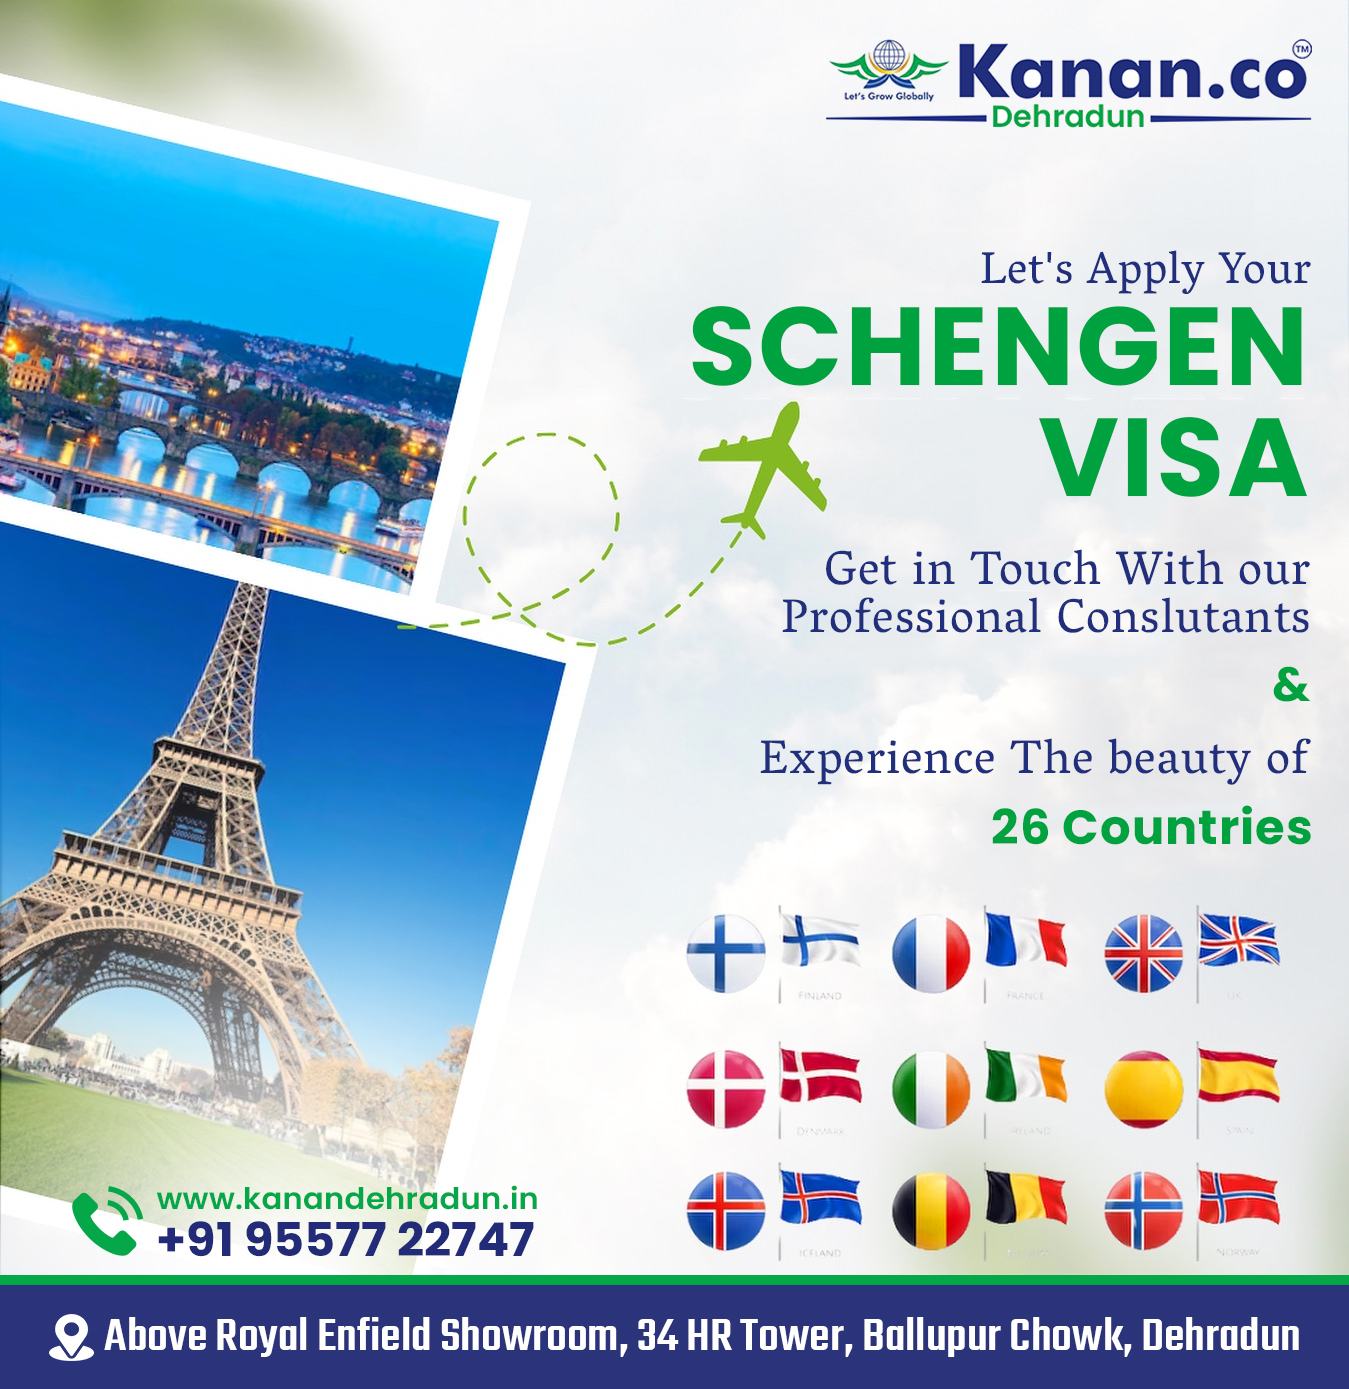 The Ultimate Guide to Applying for a Schengen Visa